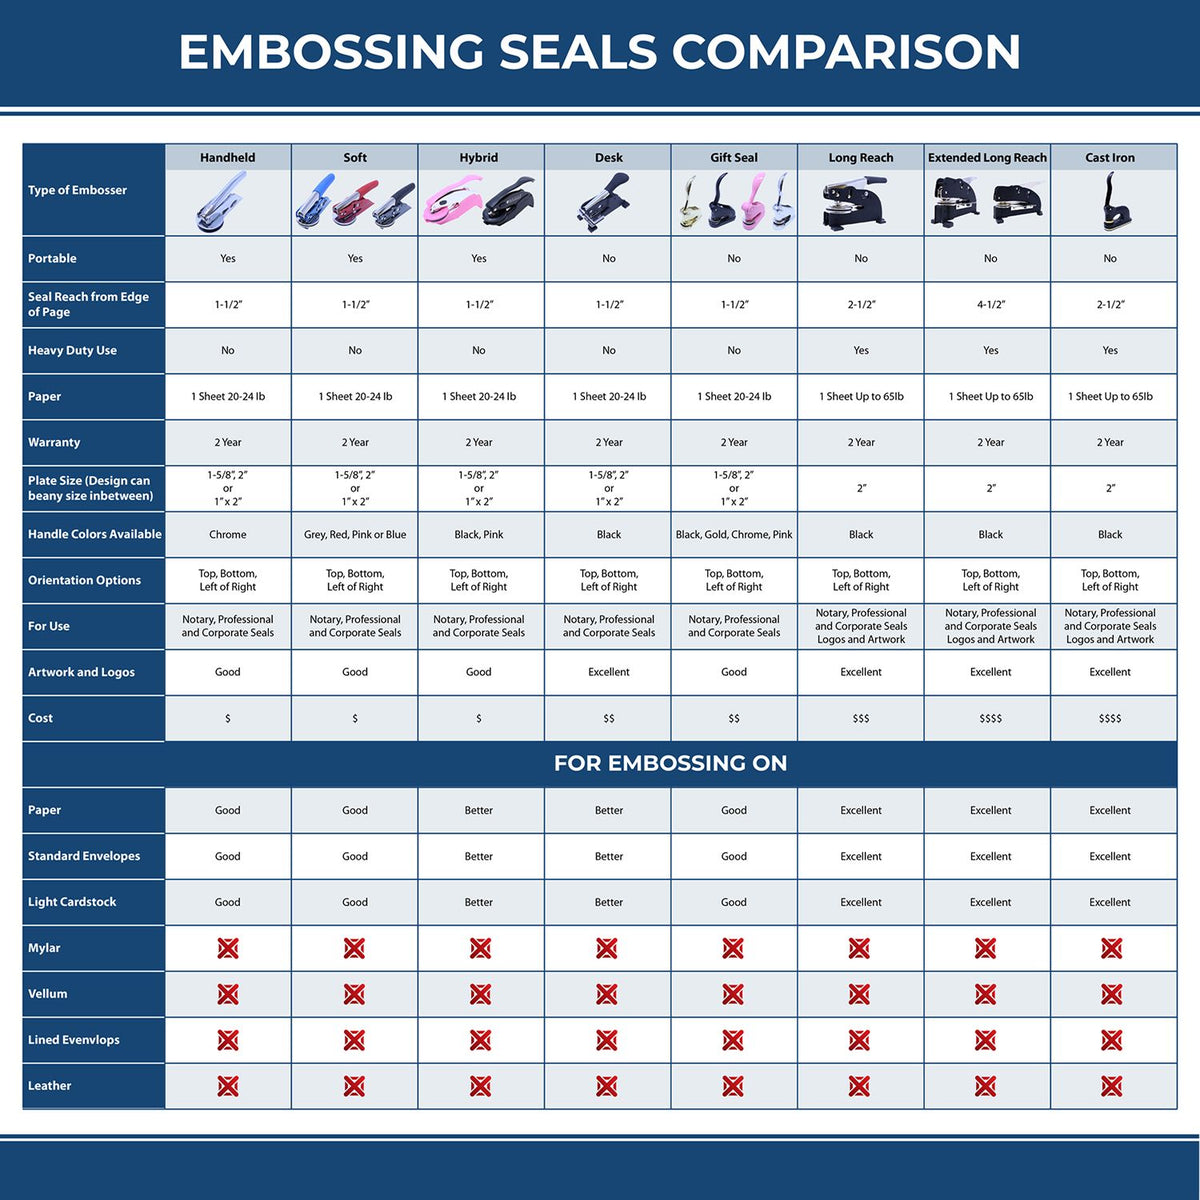 A comparison chart for the different types of mount models available for the Handheld Wyoming Architect Seal Embosser.